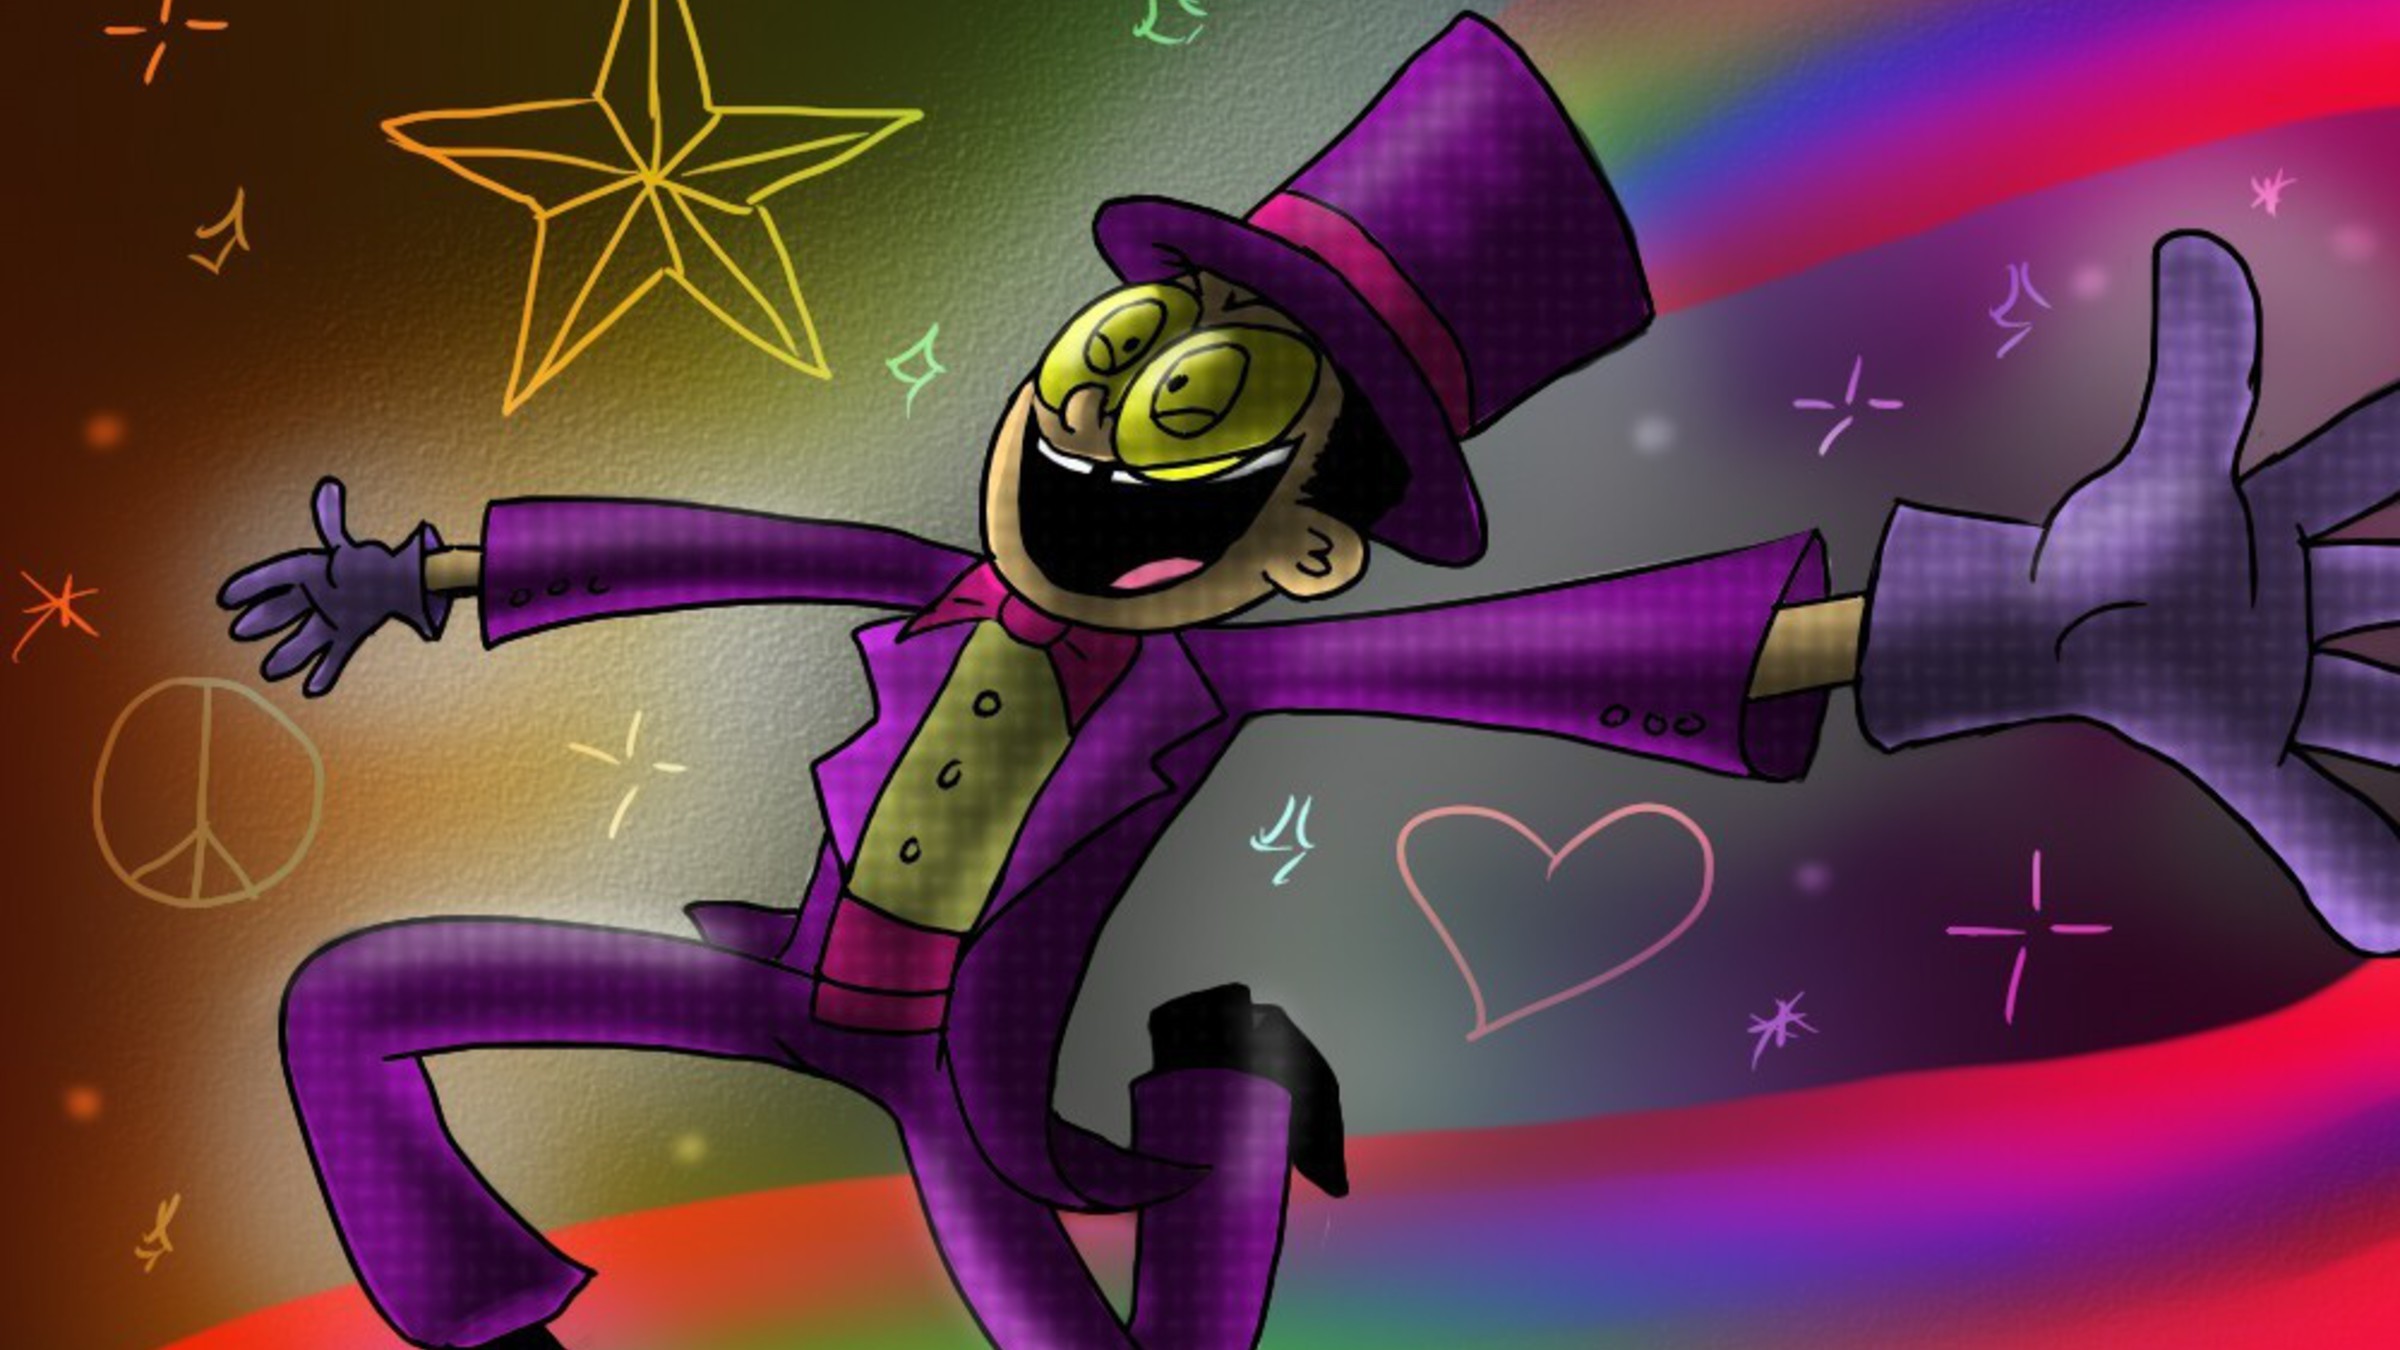 2400x1350 Stars suit rainbows superjail peace sign the warden wallpaper